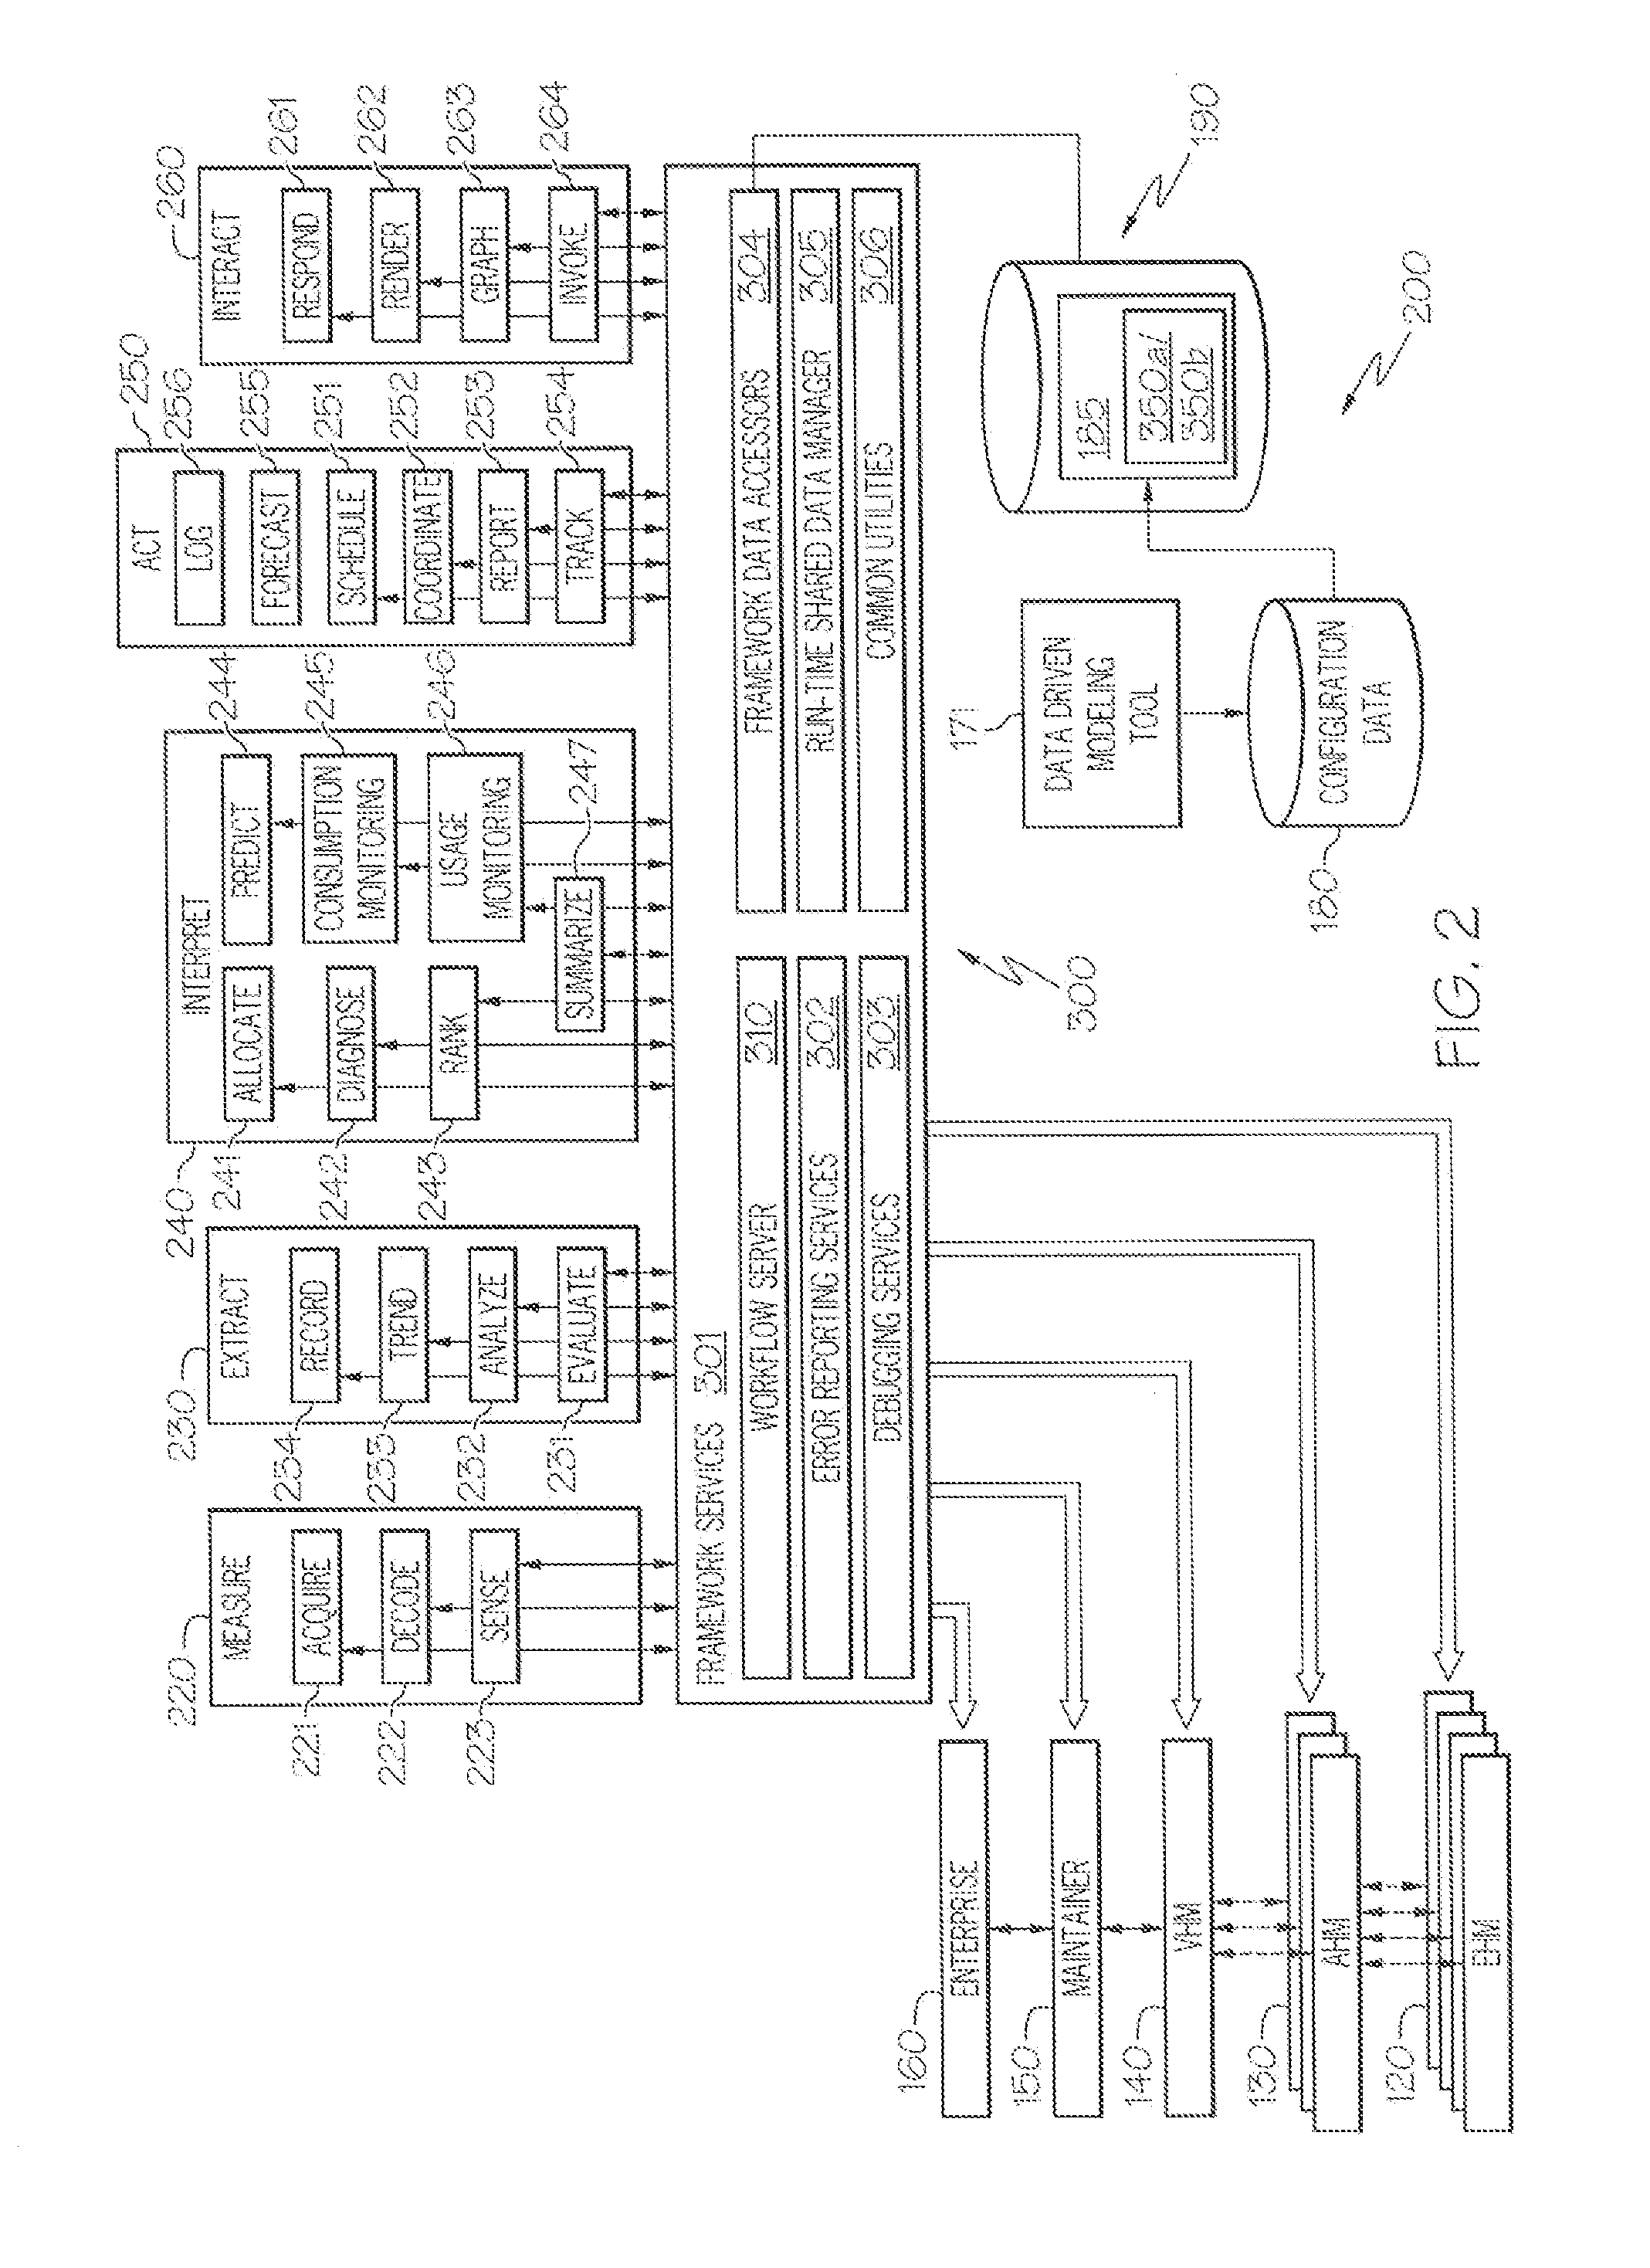 Systems and methods for coordinating computing functions to accomplish a task